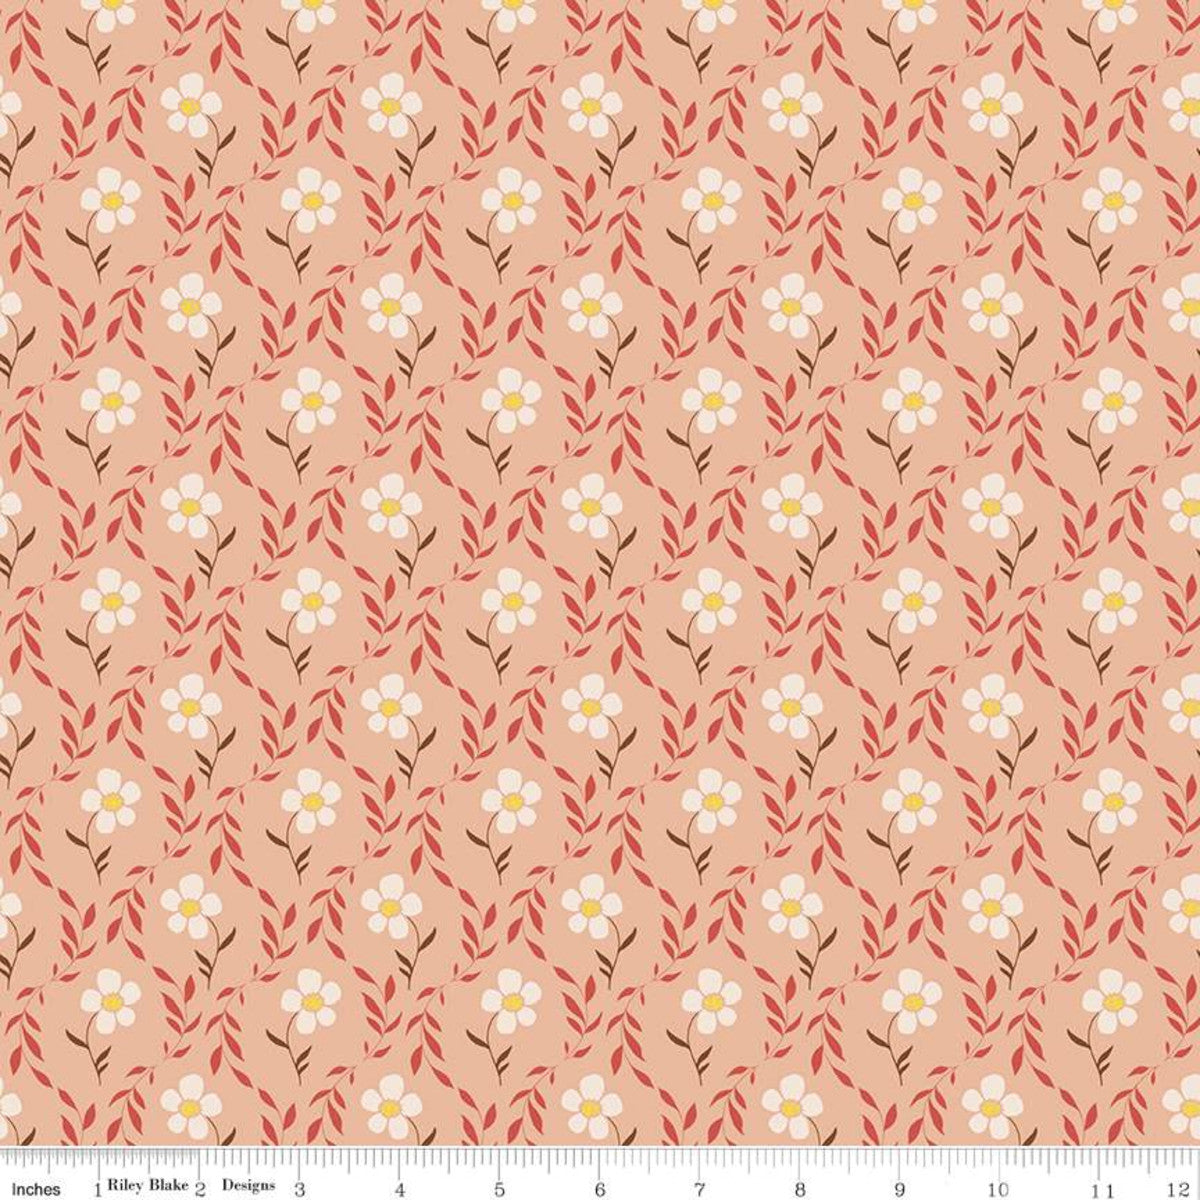 Harmony Bloom Apricot peach soft tones white flowers yellow center orange red leaves cotton quilting fabric Melissa Lee for Riley Blake Designs 